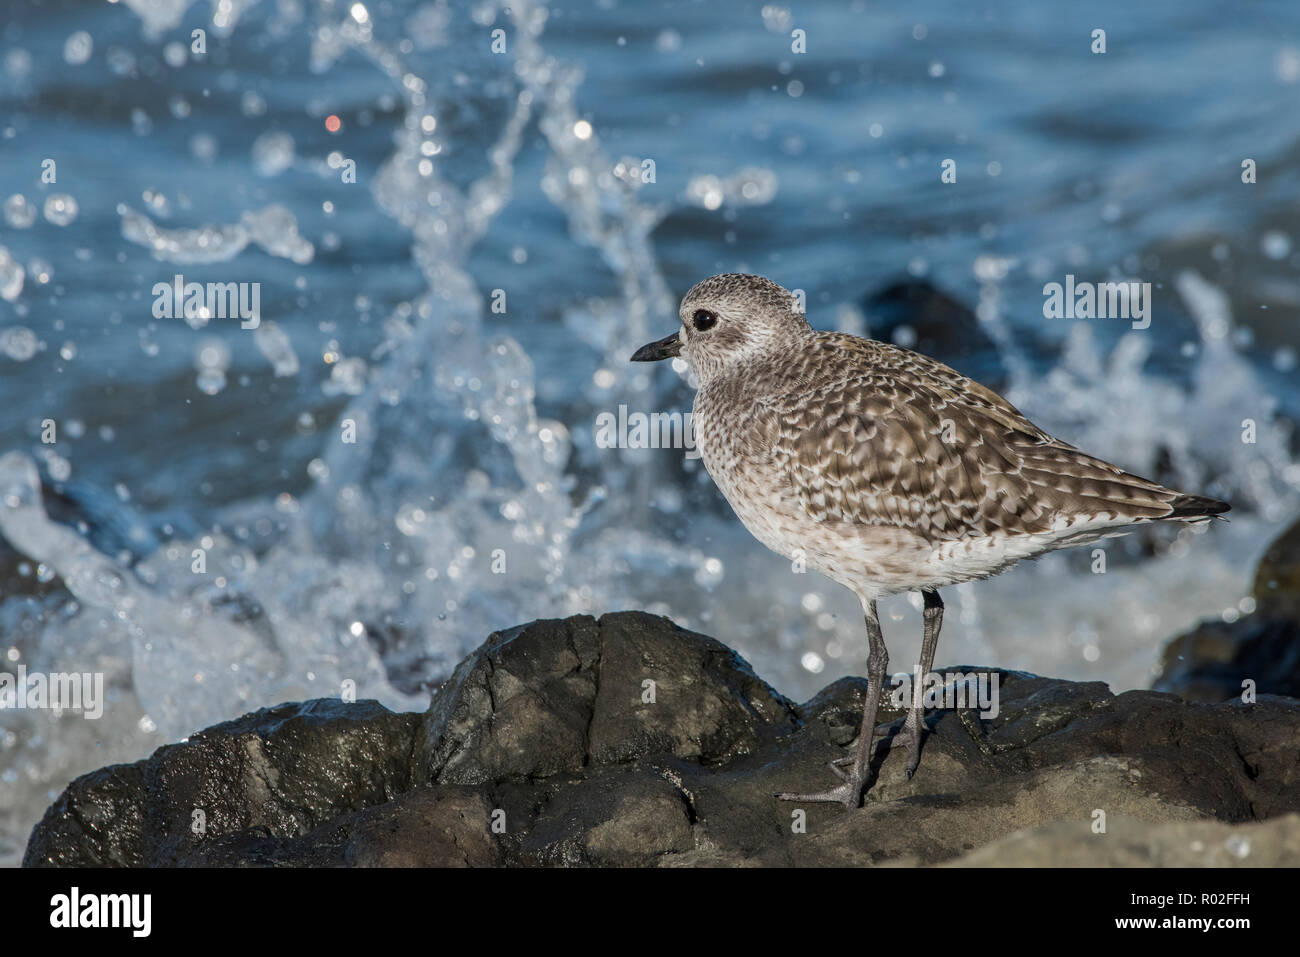 A black bellied plover also known as a grey plover (Pluvialis squatarola) with winter plumage photographed late October in the San Francisco bay. Stock Photo